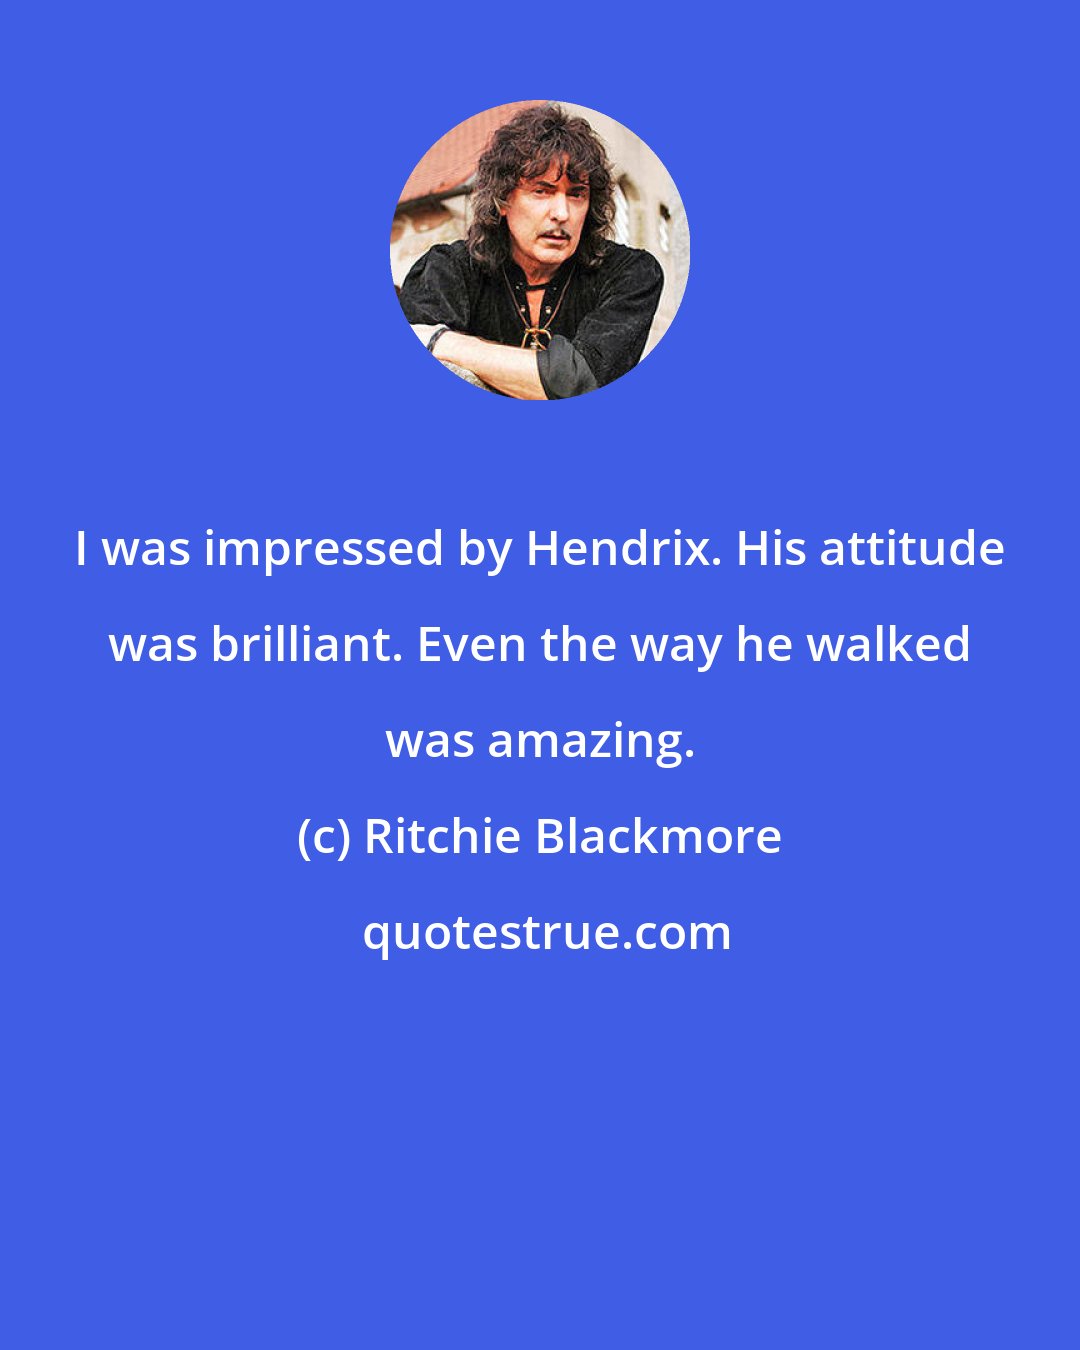 Ritchie Blackmore: I was impressed by Hendrix. His attitude was brilliant. Even the way he walked was amazing.